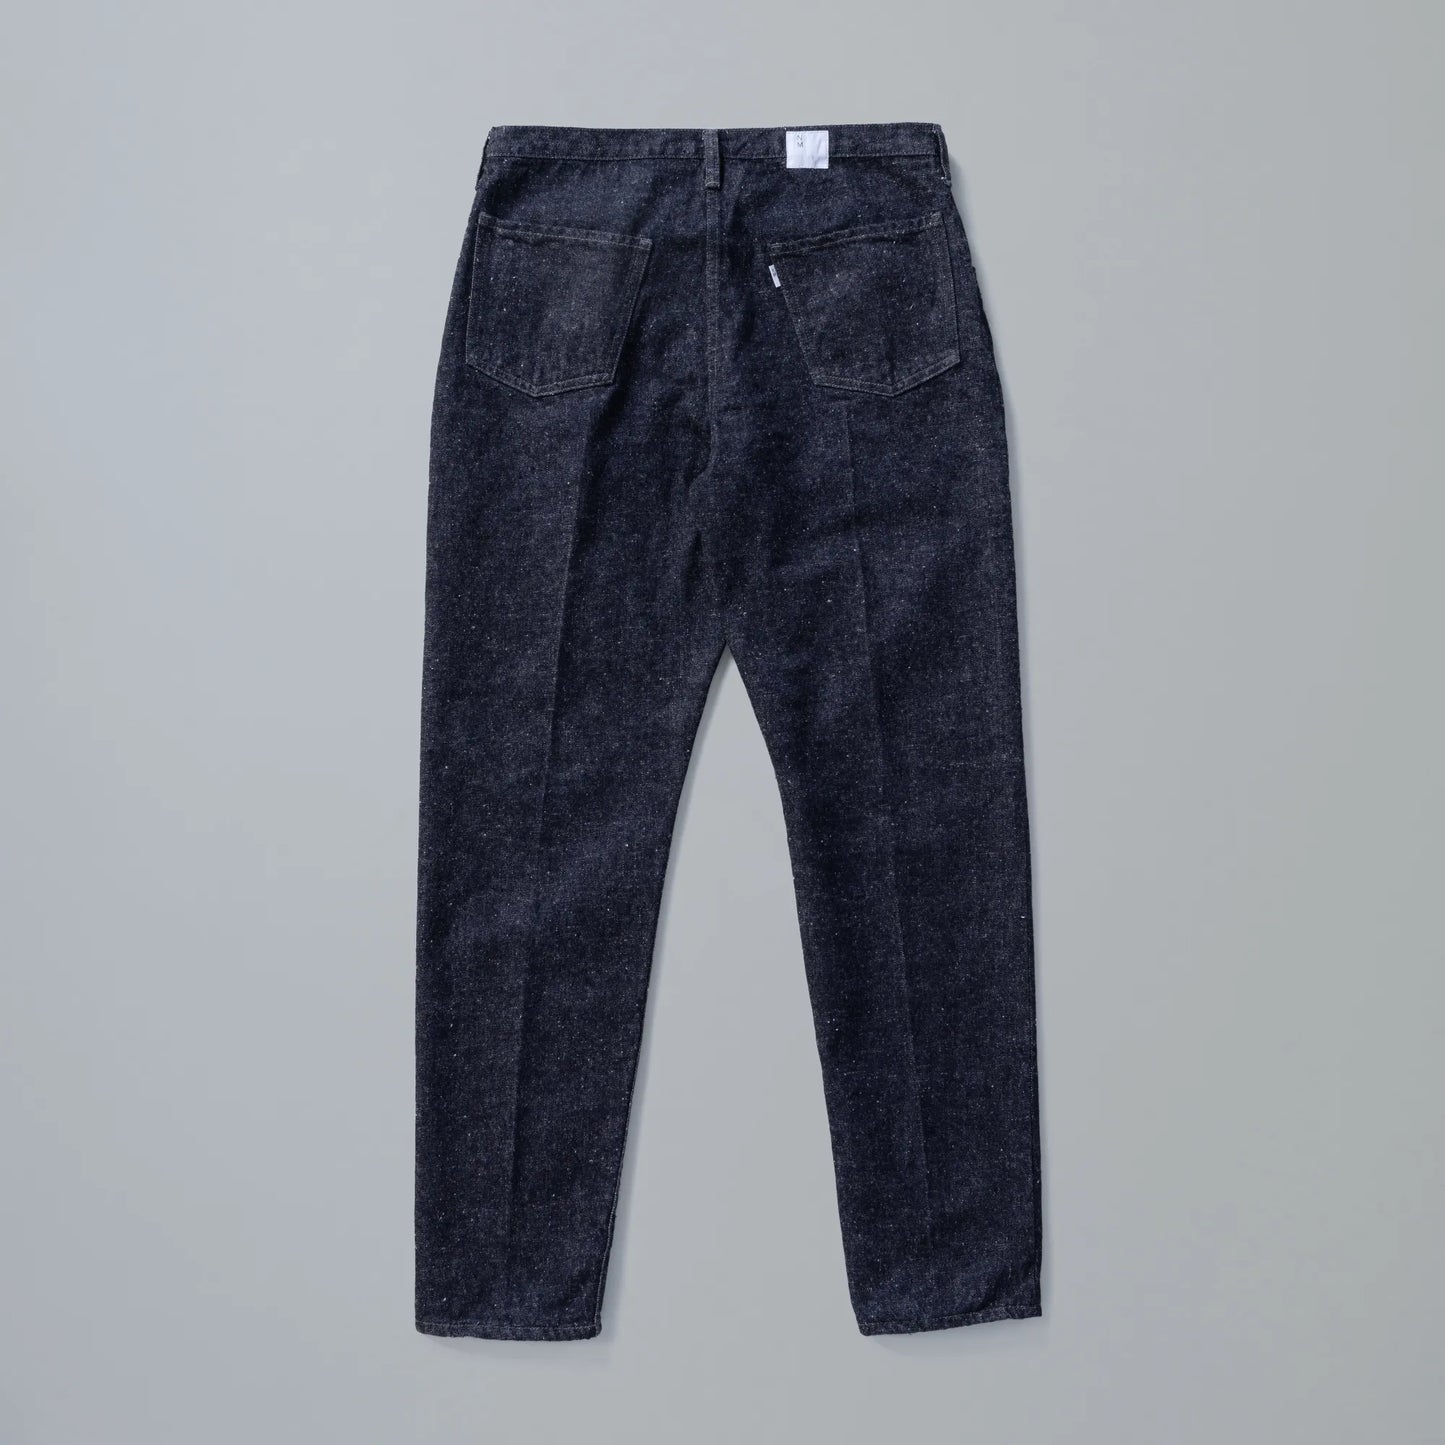 #022 LV MCQUEEN PANTS ONE-WASHED BEG